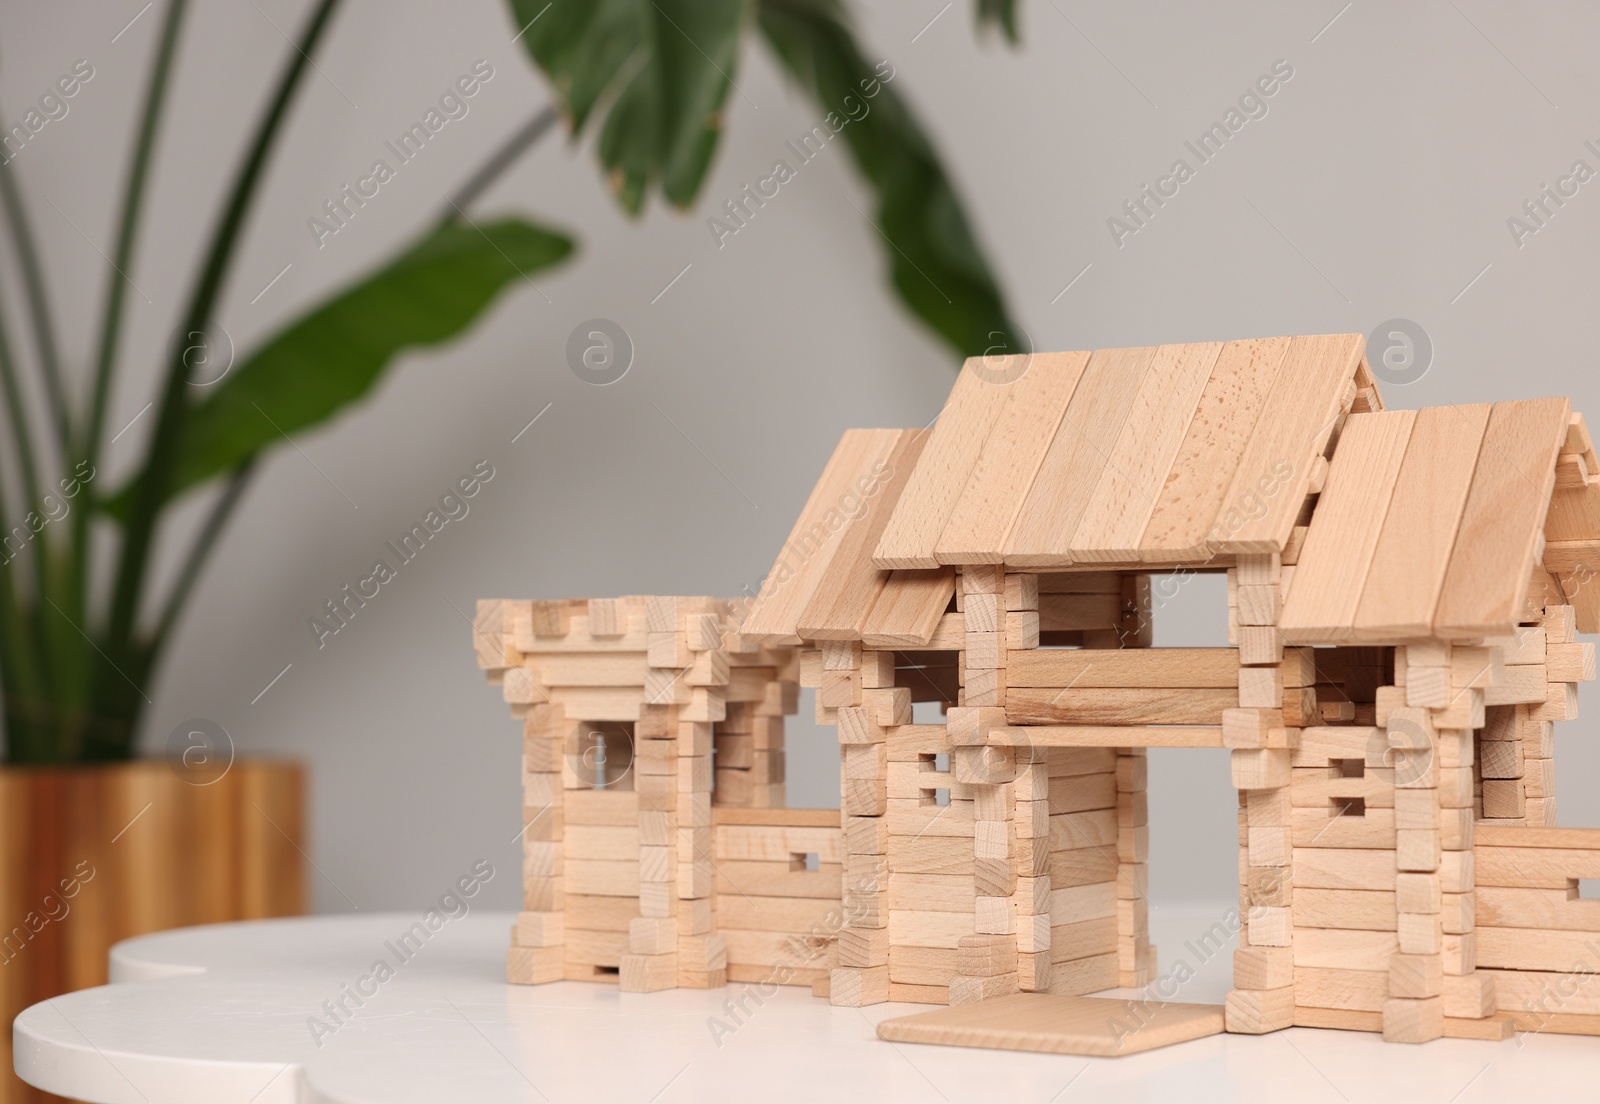 Photo of Wooden entry gate on white table against blurred background, space for text. Children's toy